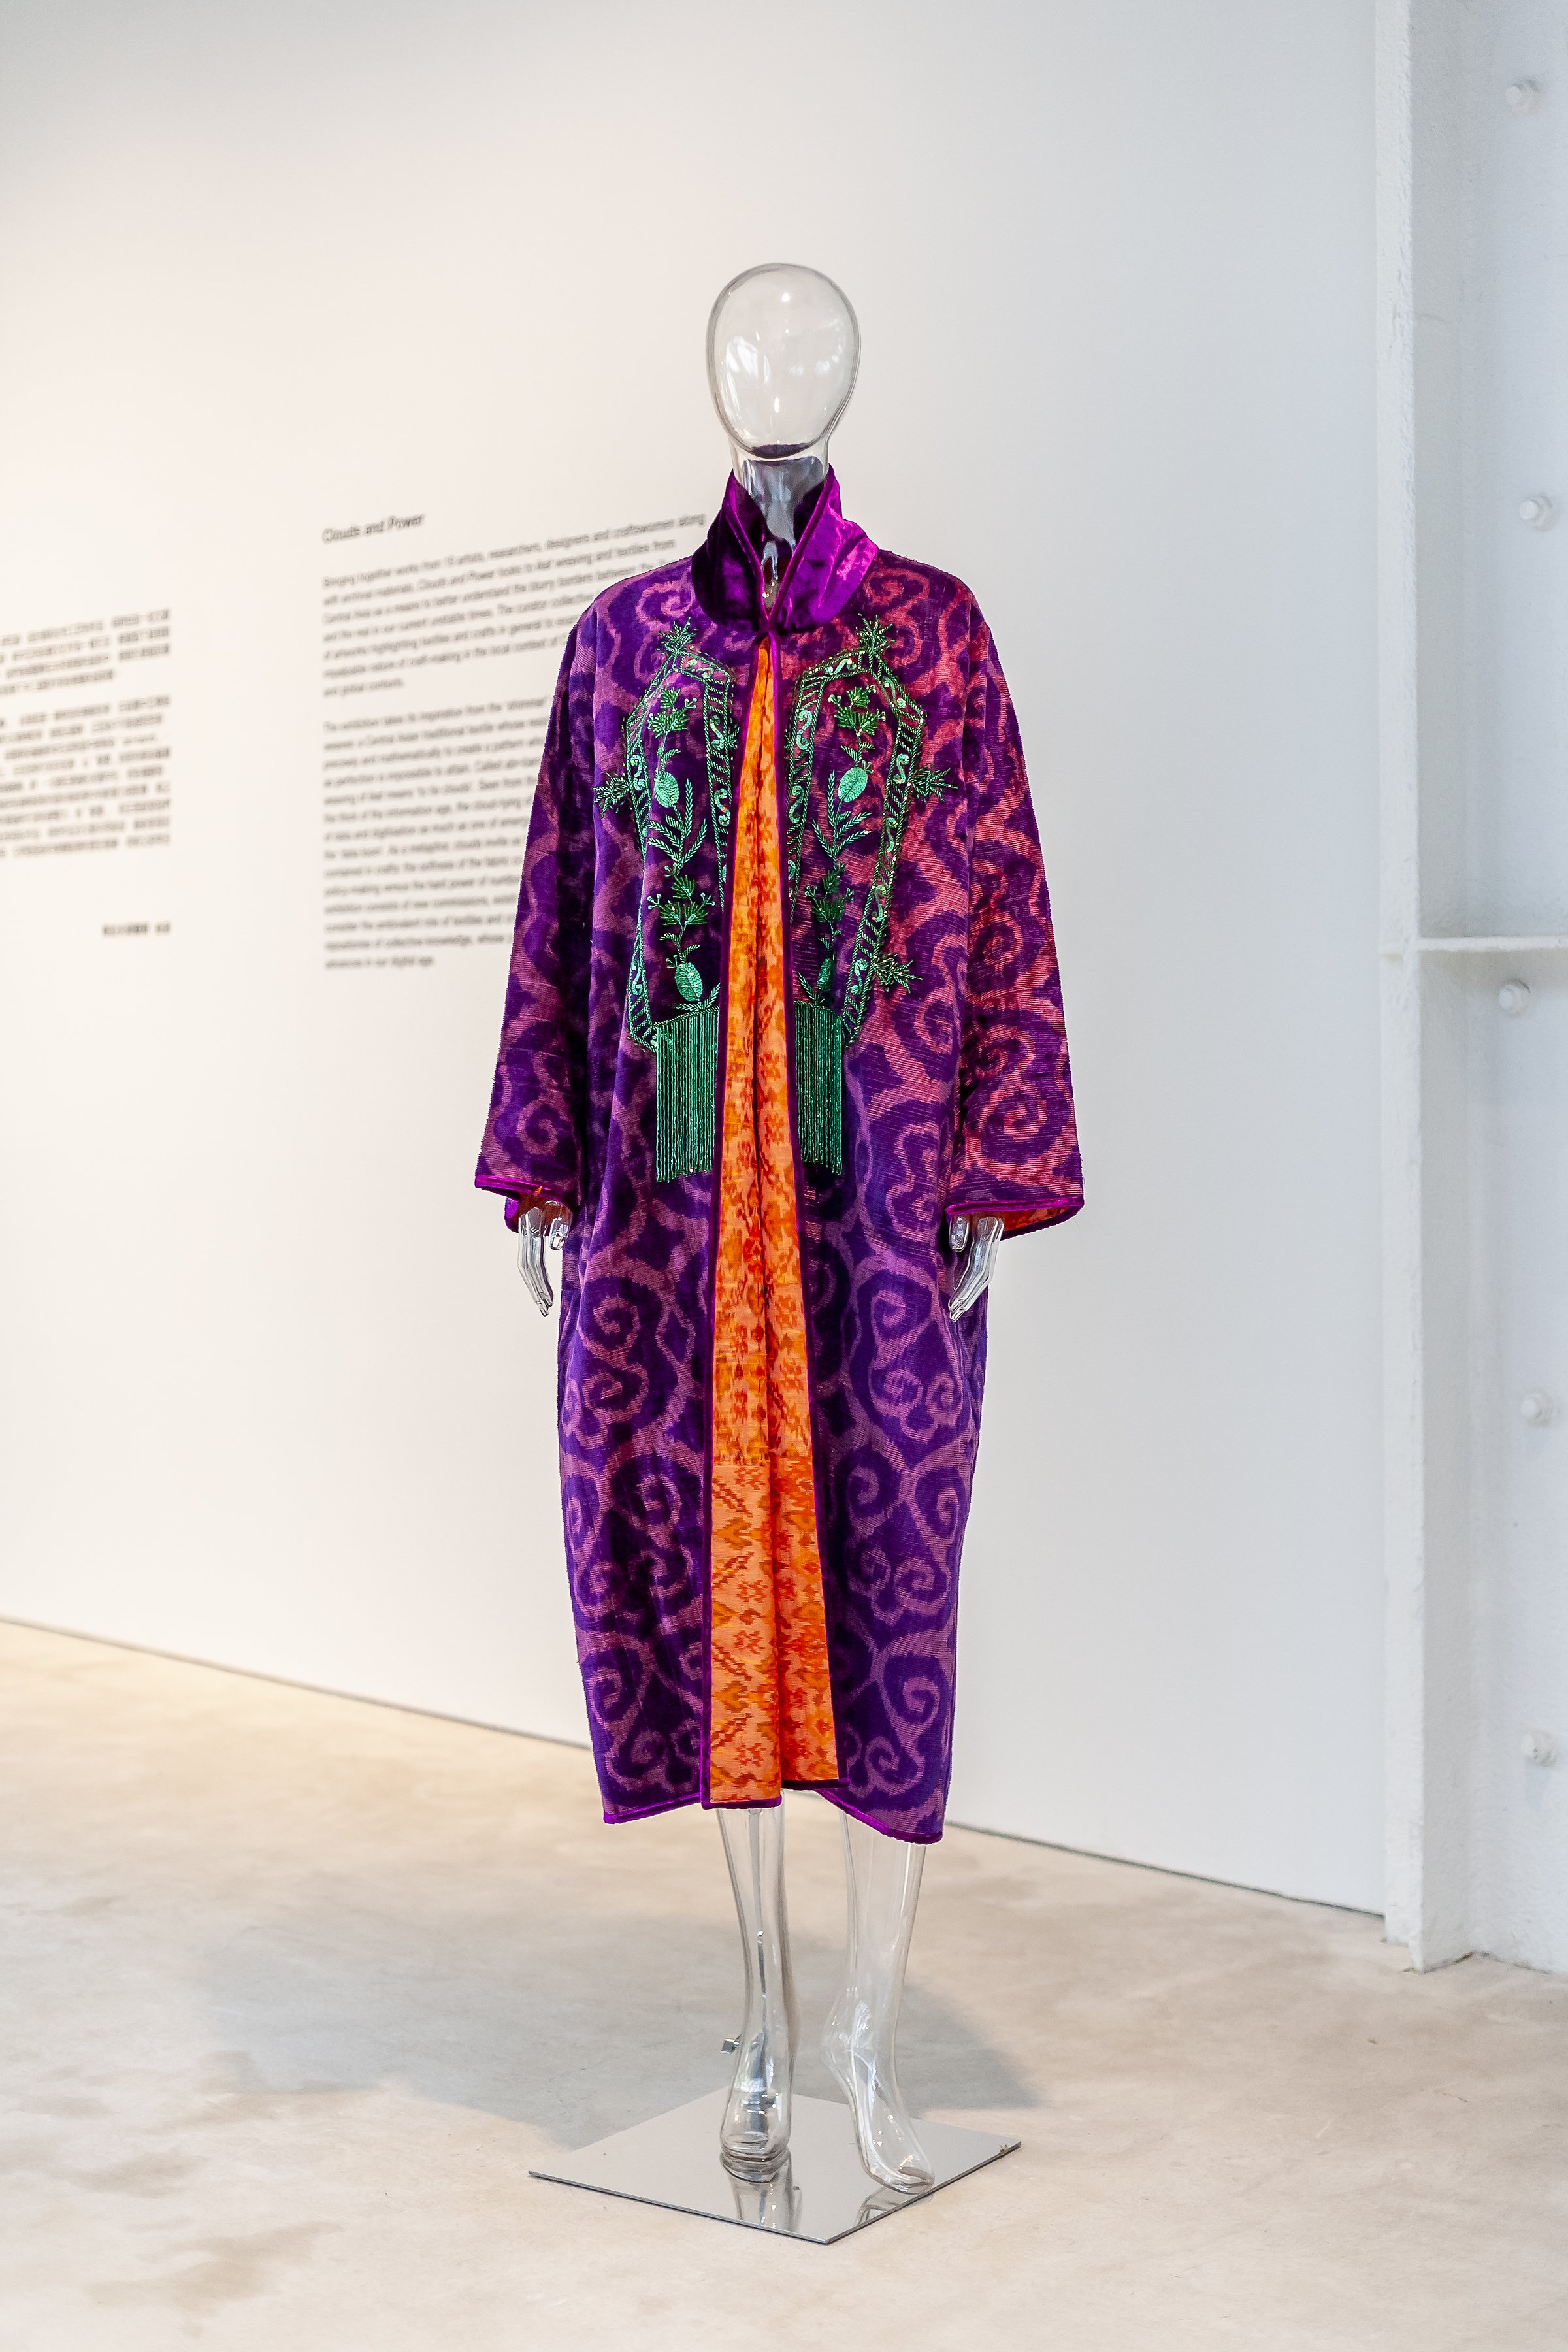 Exhibition view: Clouds, Power and Ornament – Roving Central Asia, CHAT  (Centre for Heritage, Arts and Textile), Hong Kong, 2023